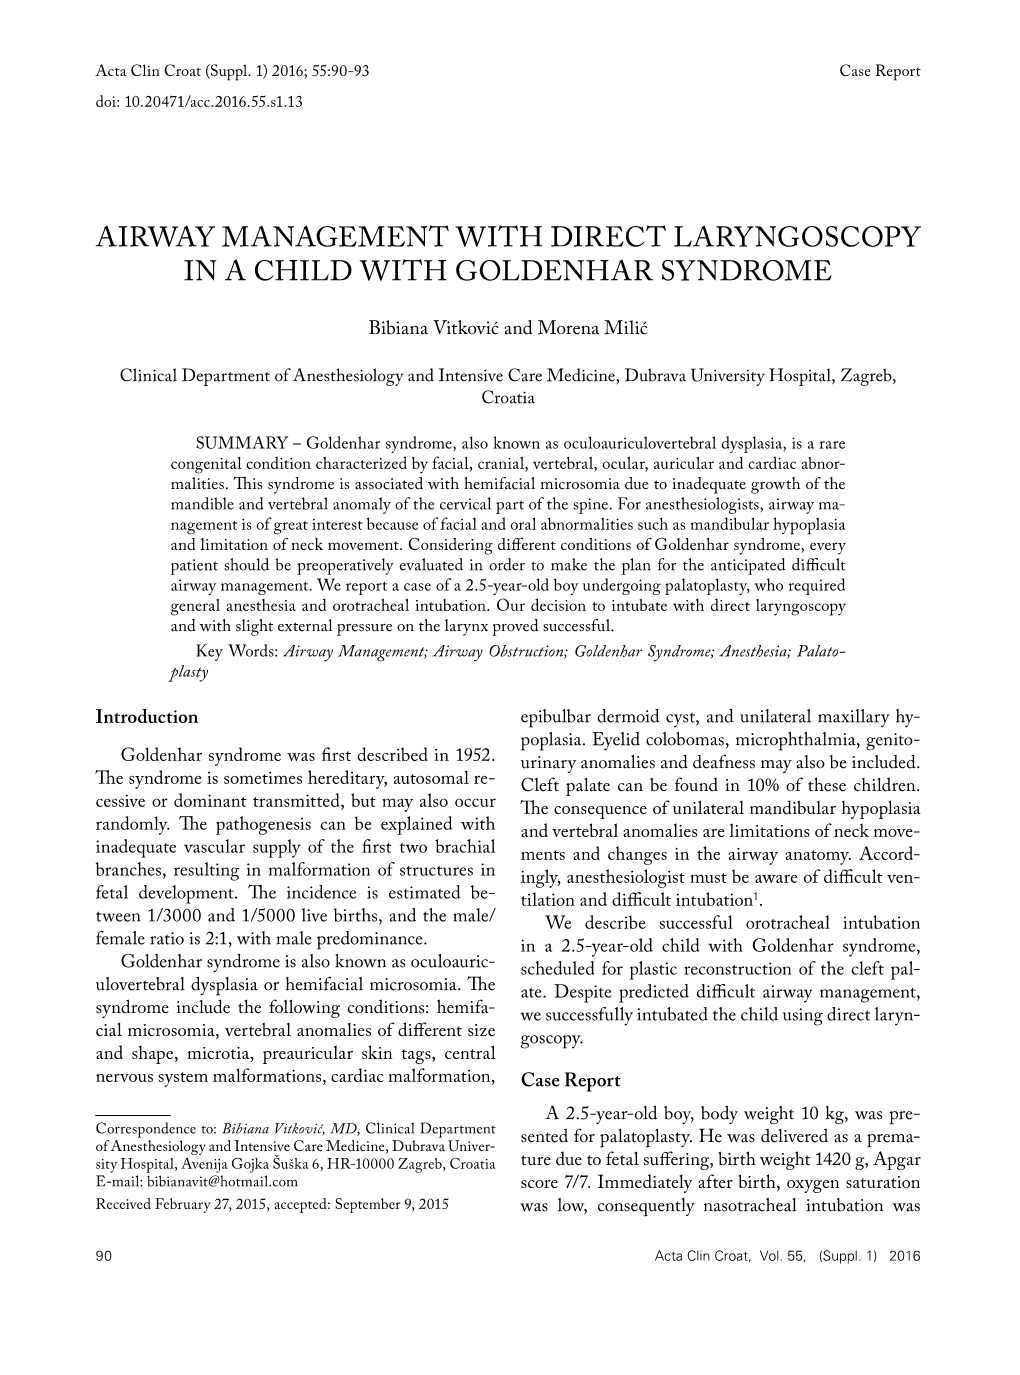 Airway Management with Direct Laryngoscopy in a Child with Goldenhar Syndrome